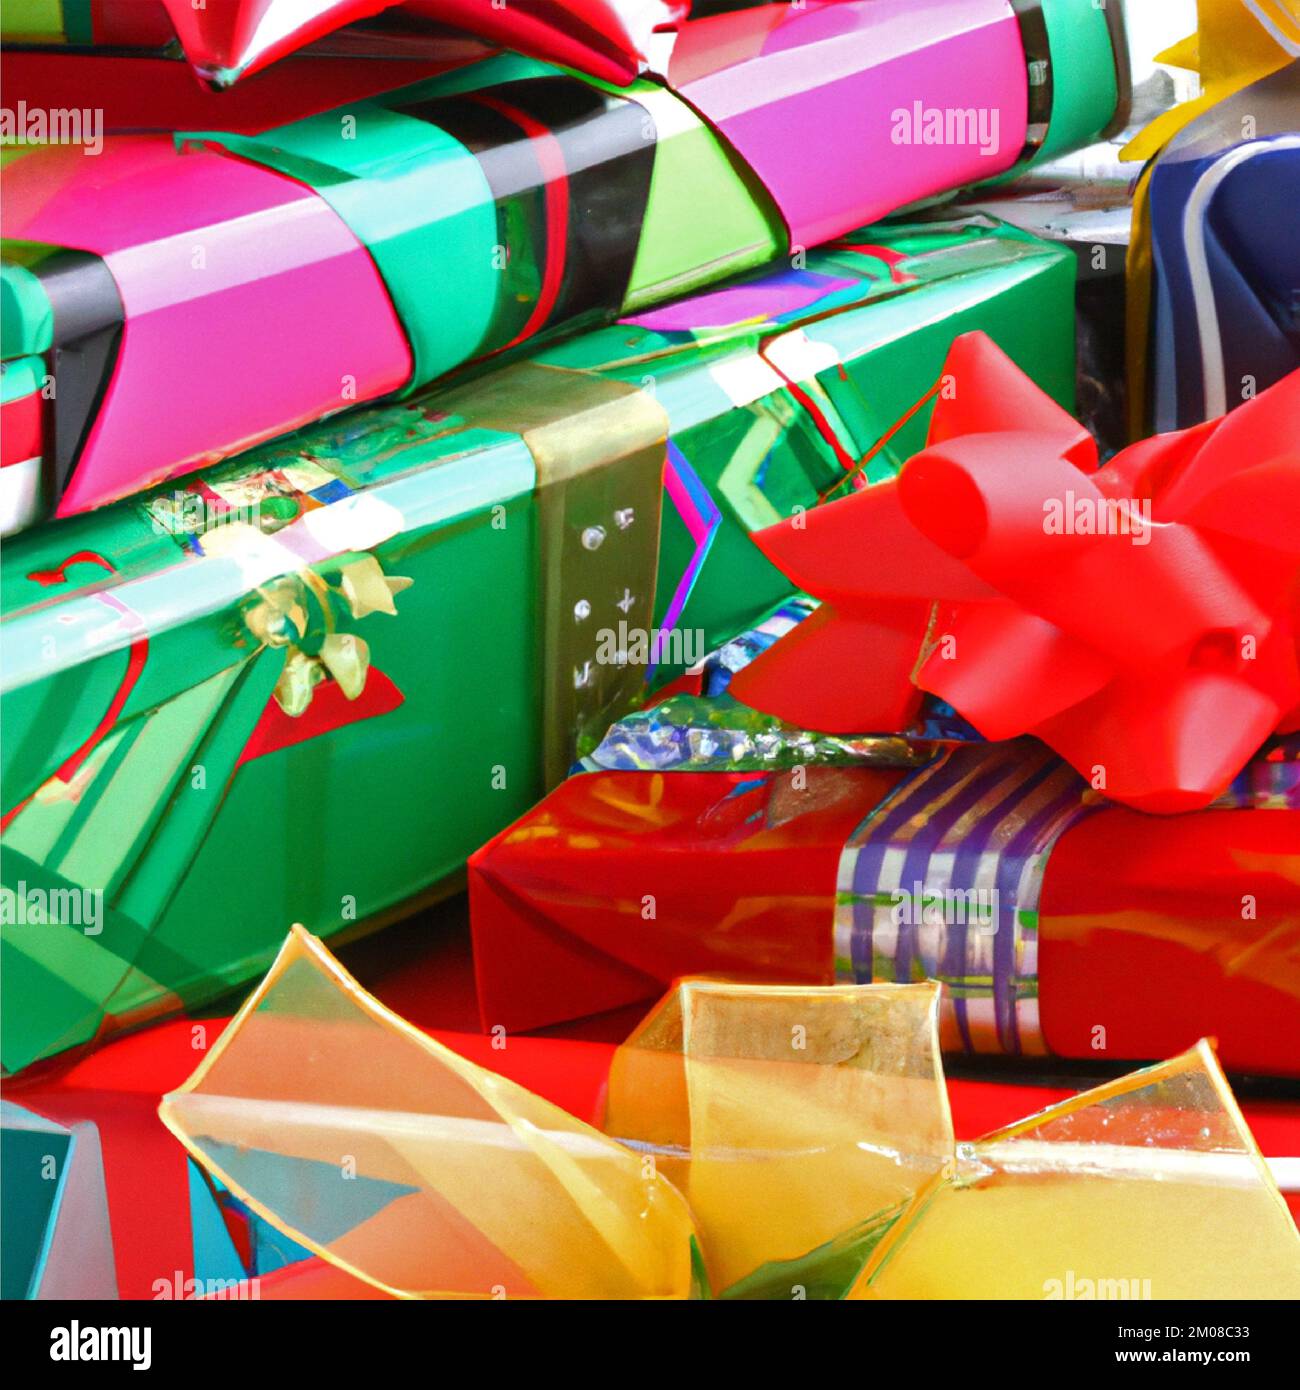 Square background, colorful holiday gift boxes with ribbons and bows. Stock Photo